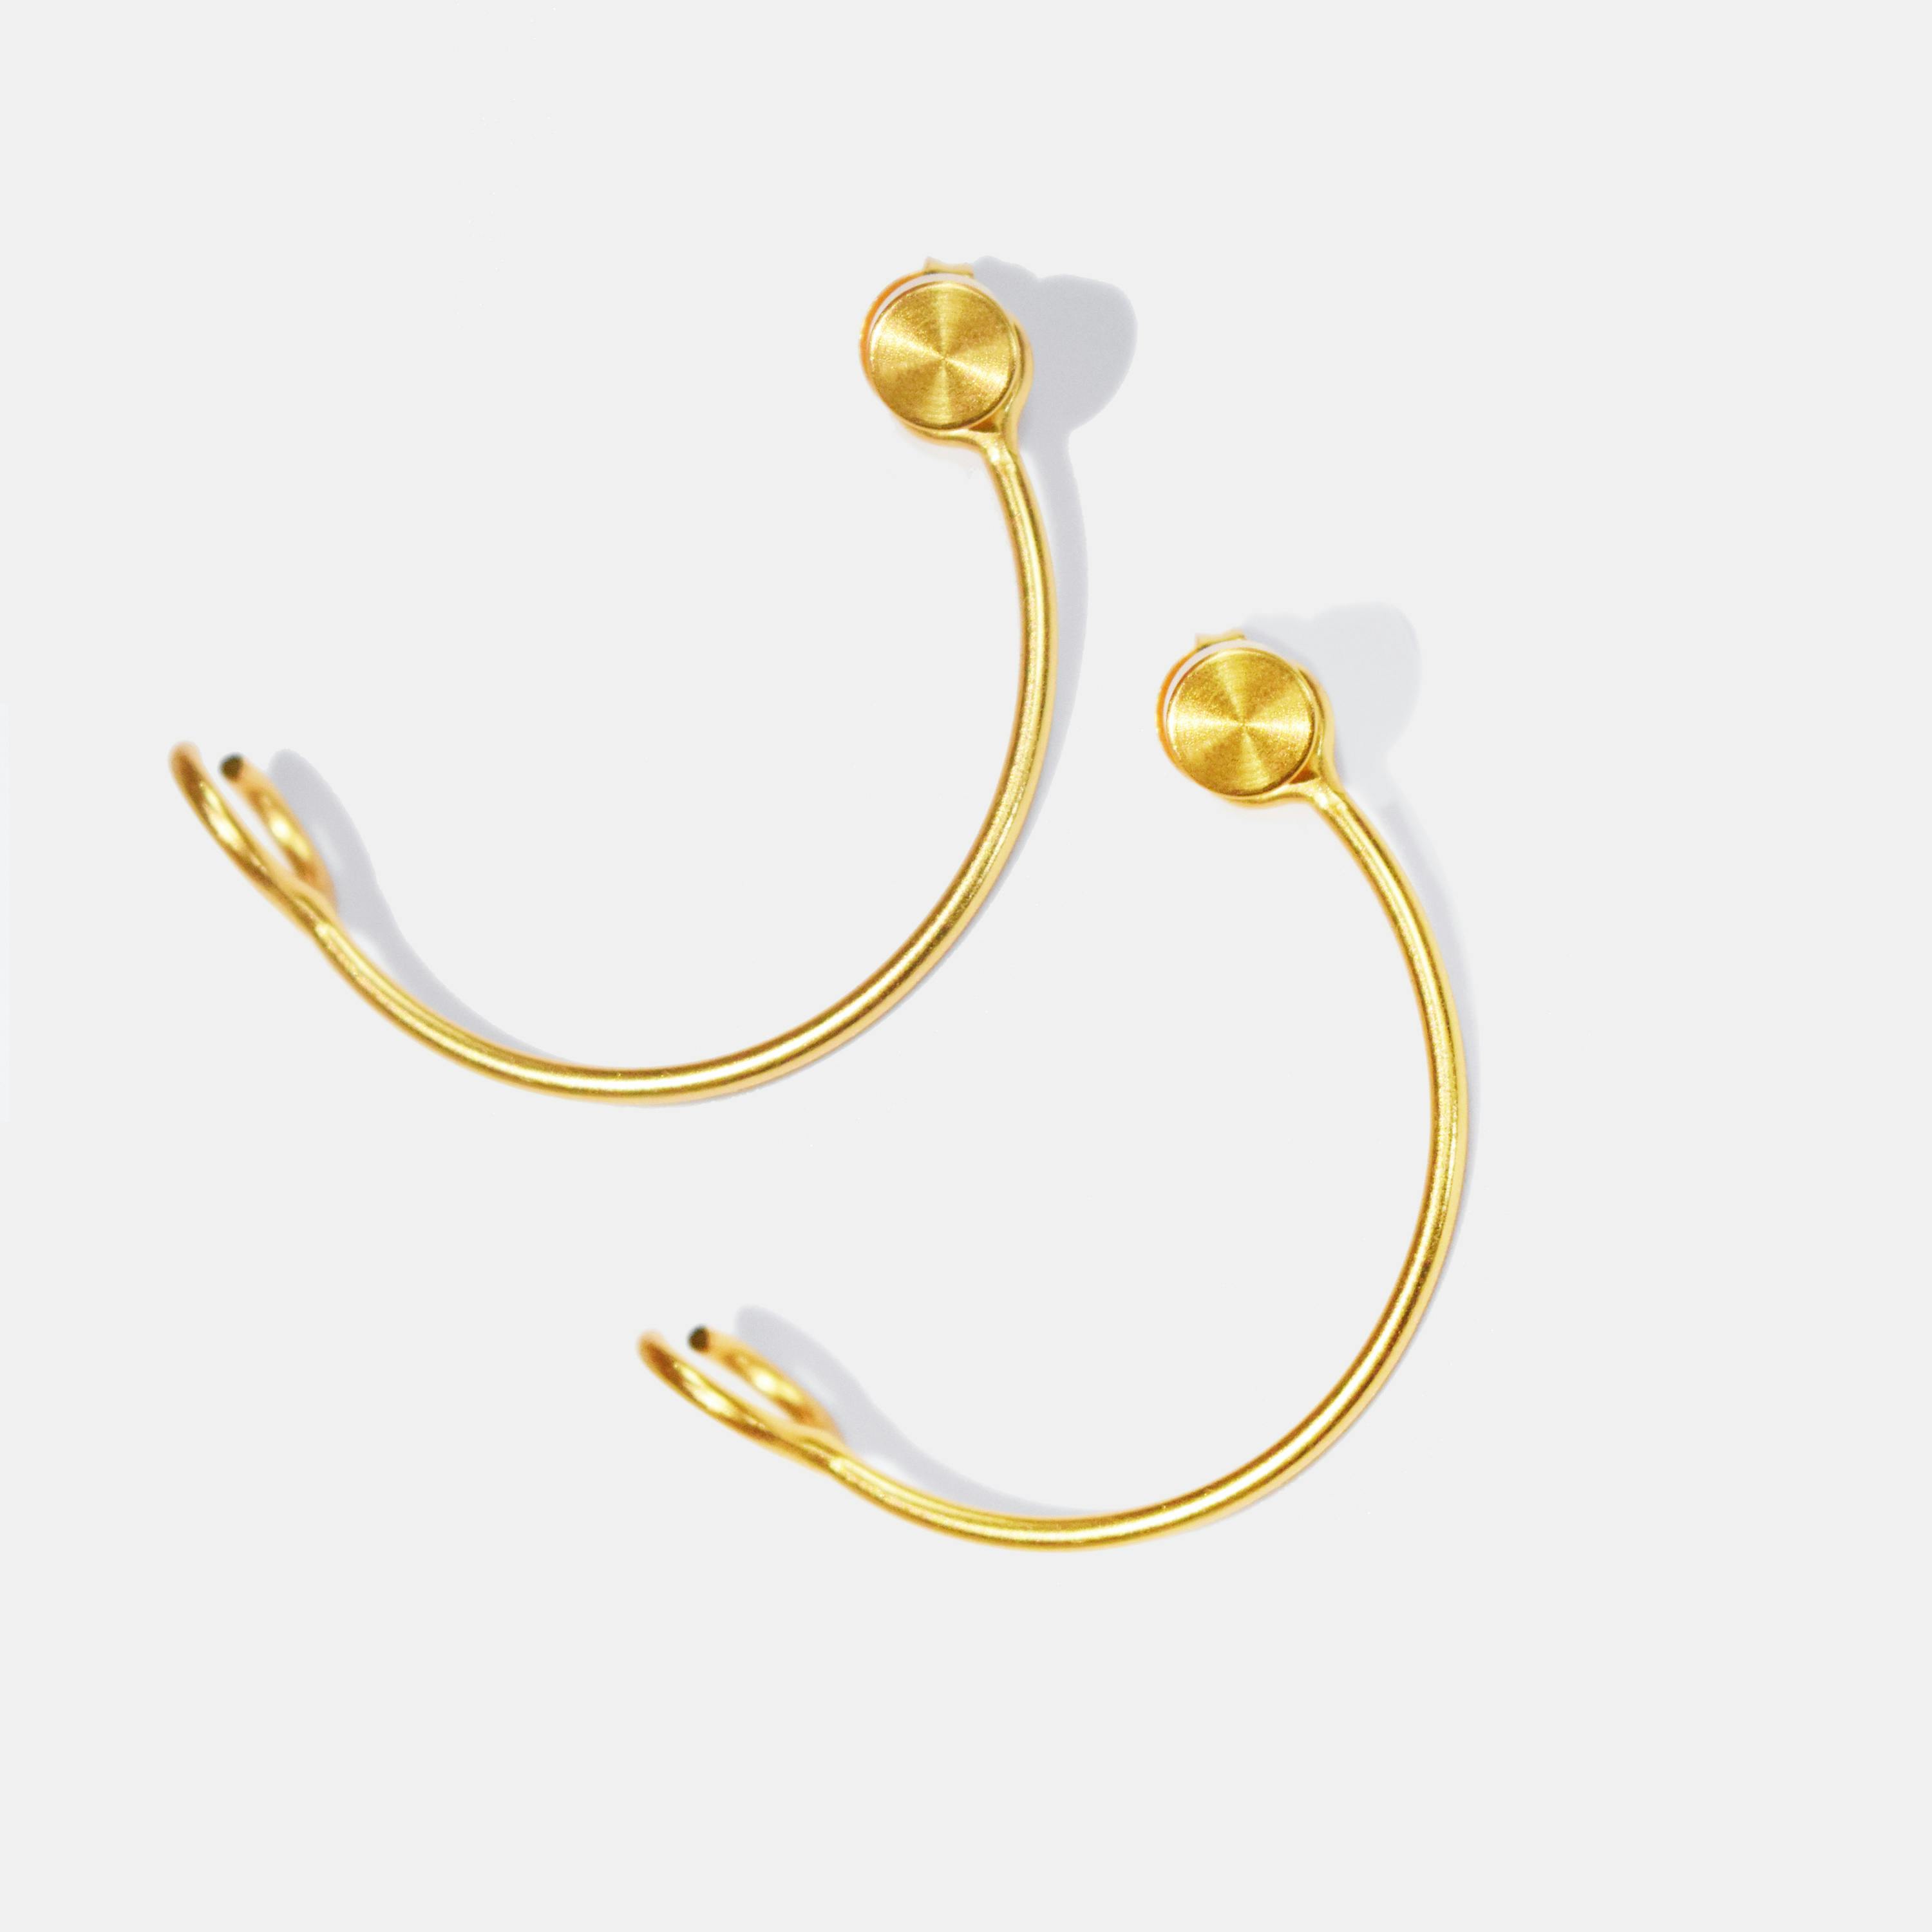 Arc-Hemedes Earring, a product by NO NA MÉ